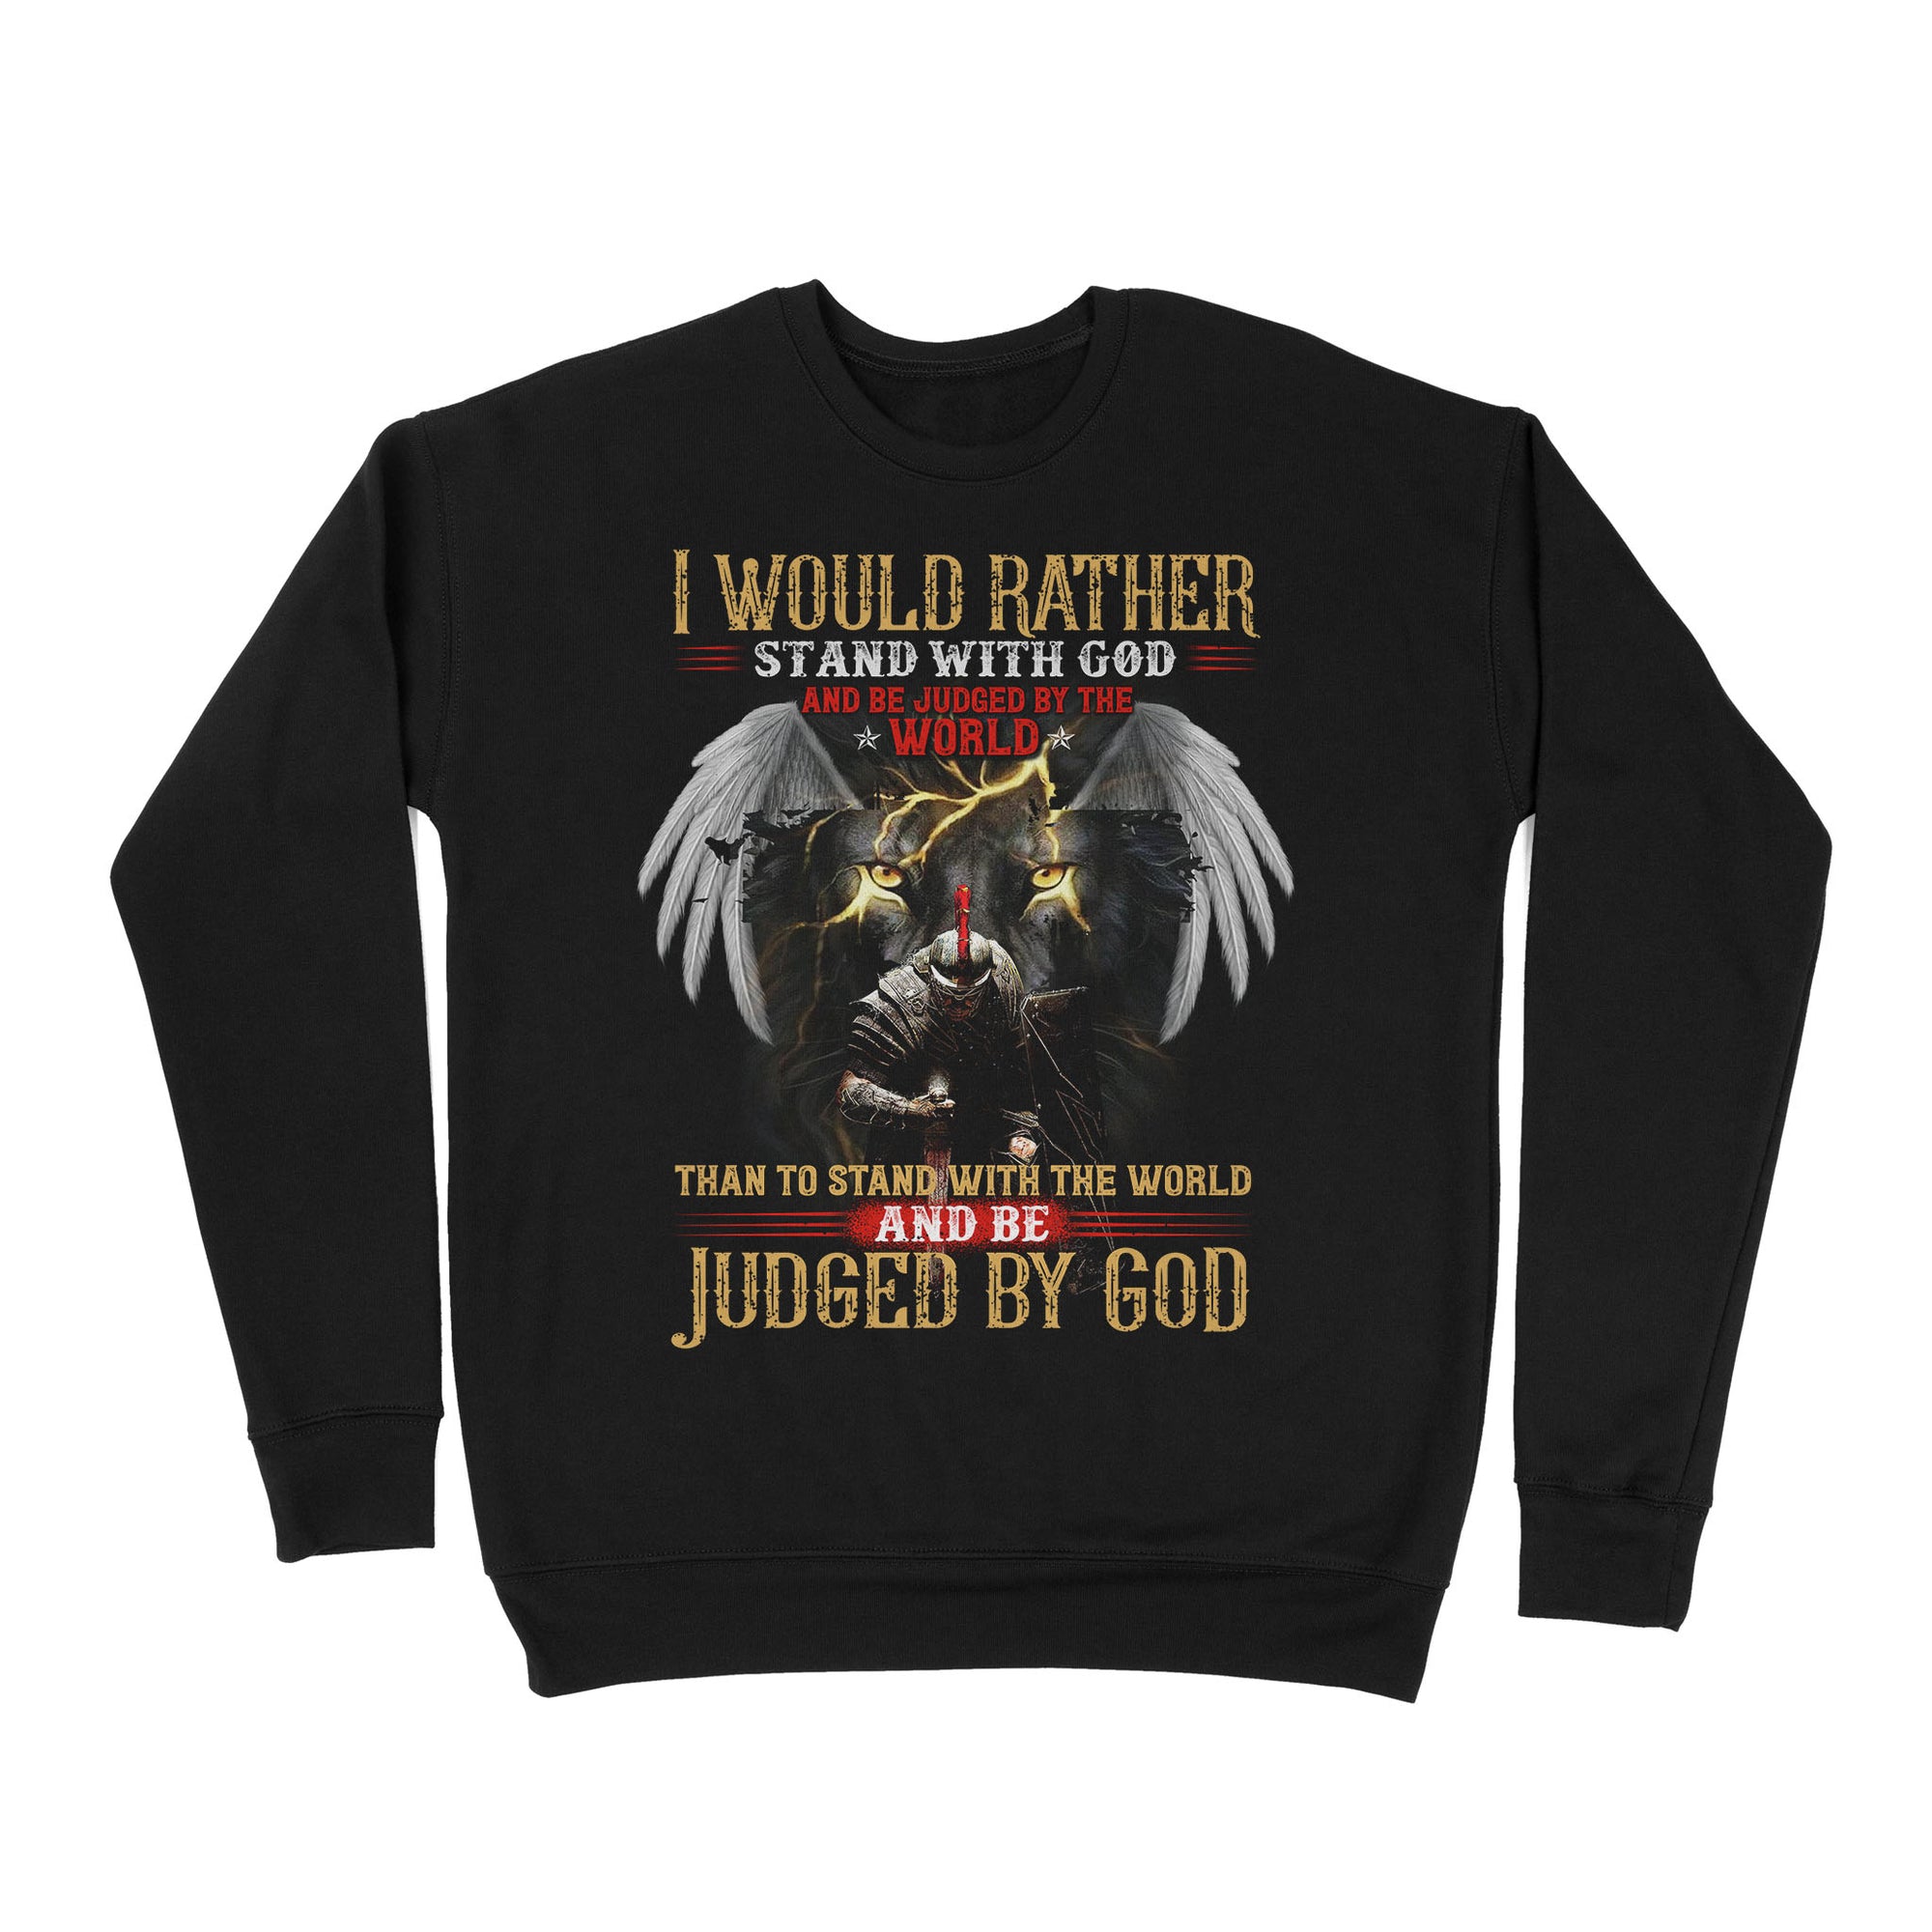 Premium Crew Neck Sweatshirt - I Would Rather Stand With God And Be Judged By The World Than To Stand With The World And Be Judged By God